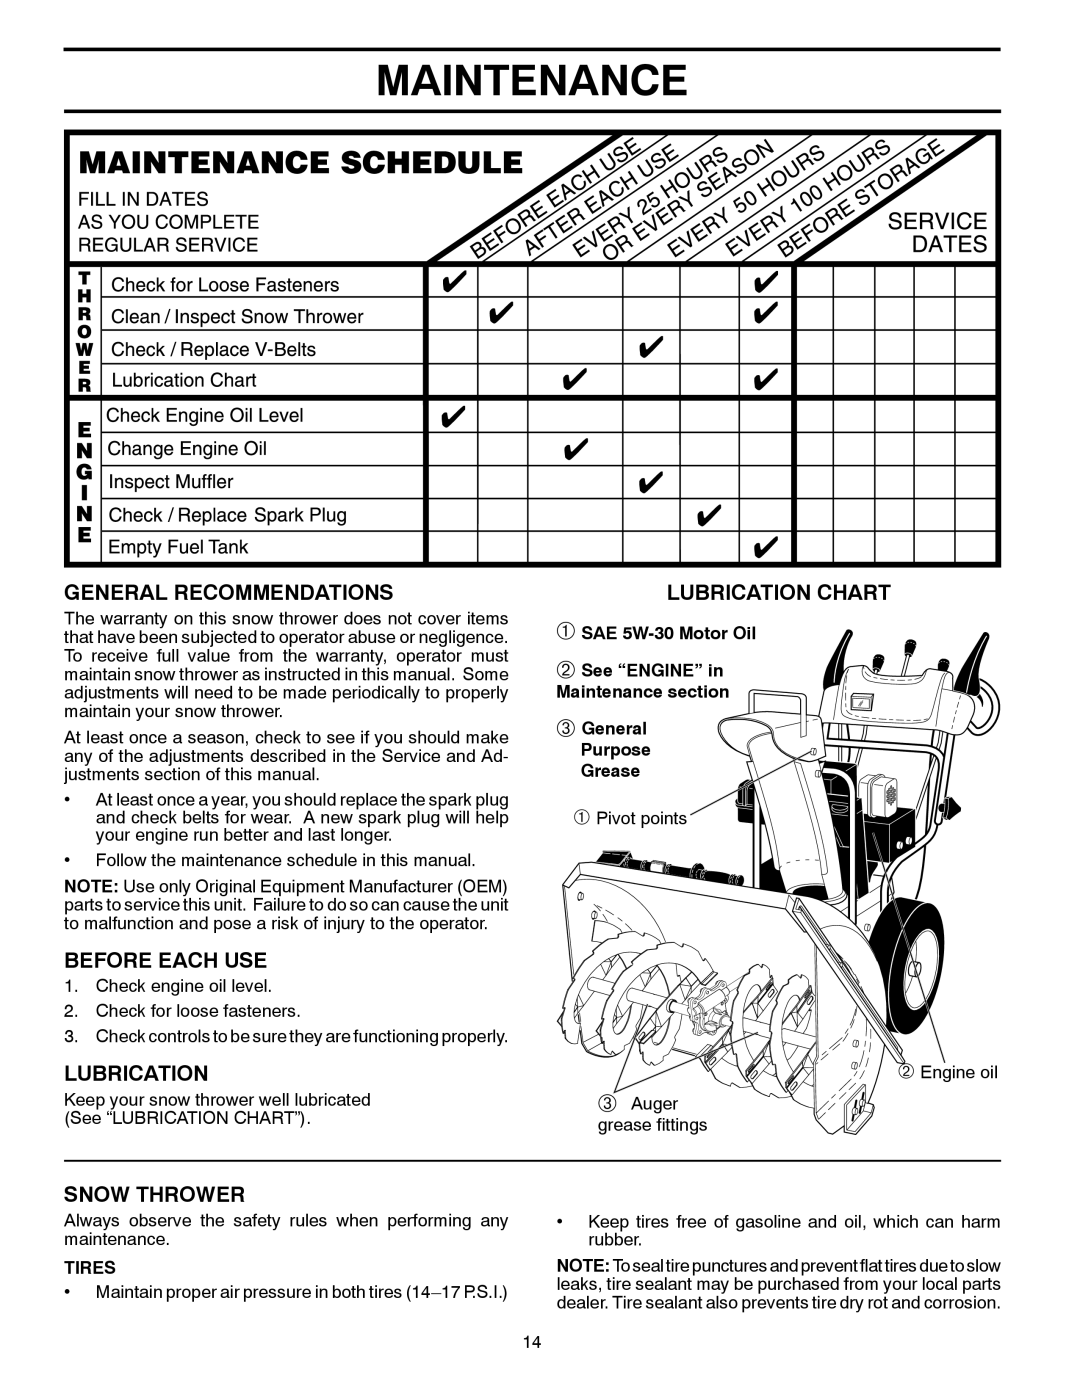 Poulan PP1330ES Maintenance, General Recommendations, Before Each Use, Snow Thrower, Lubrication Chart, Purpose Grease 